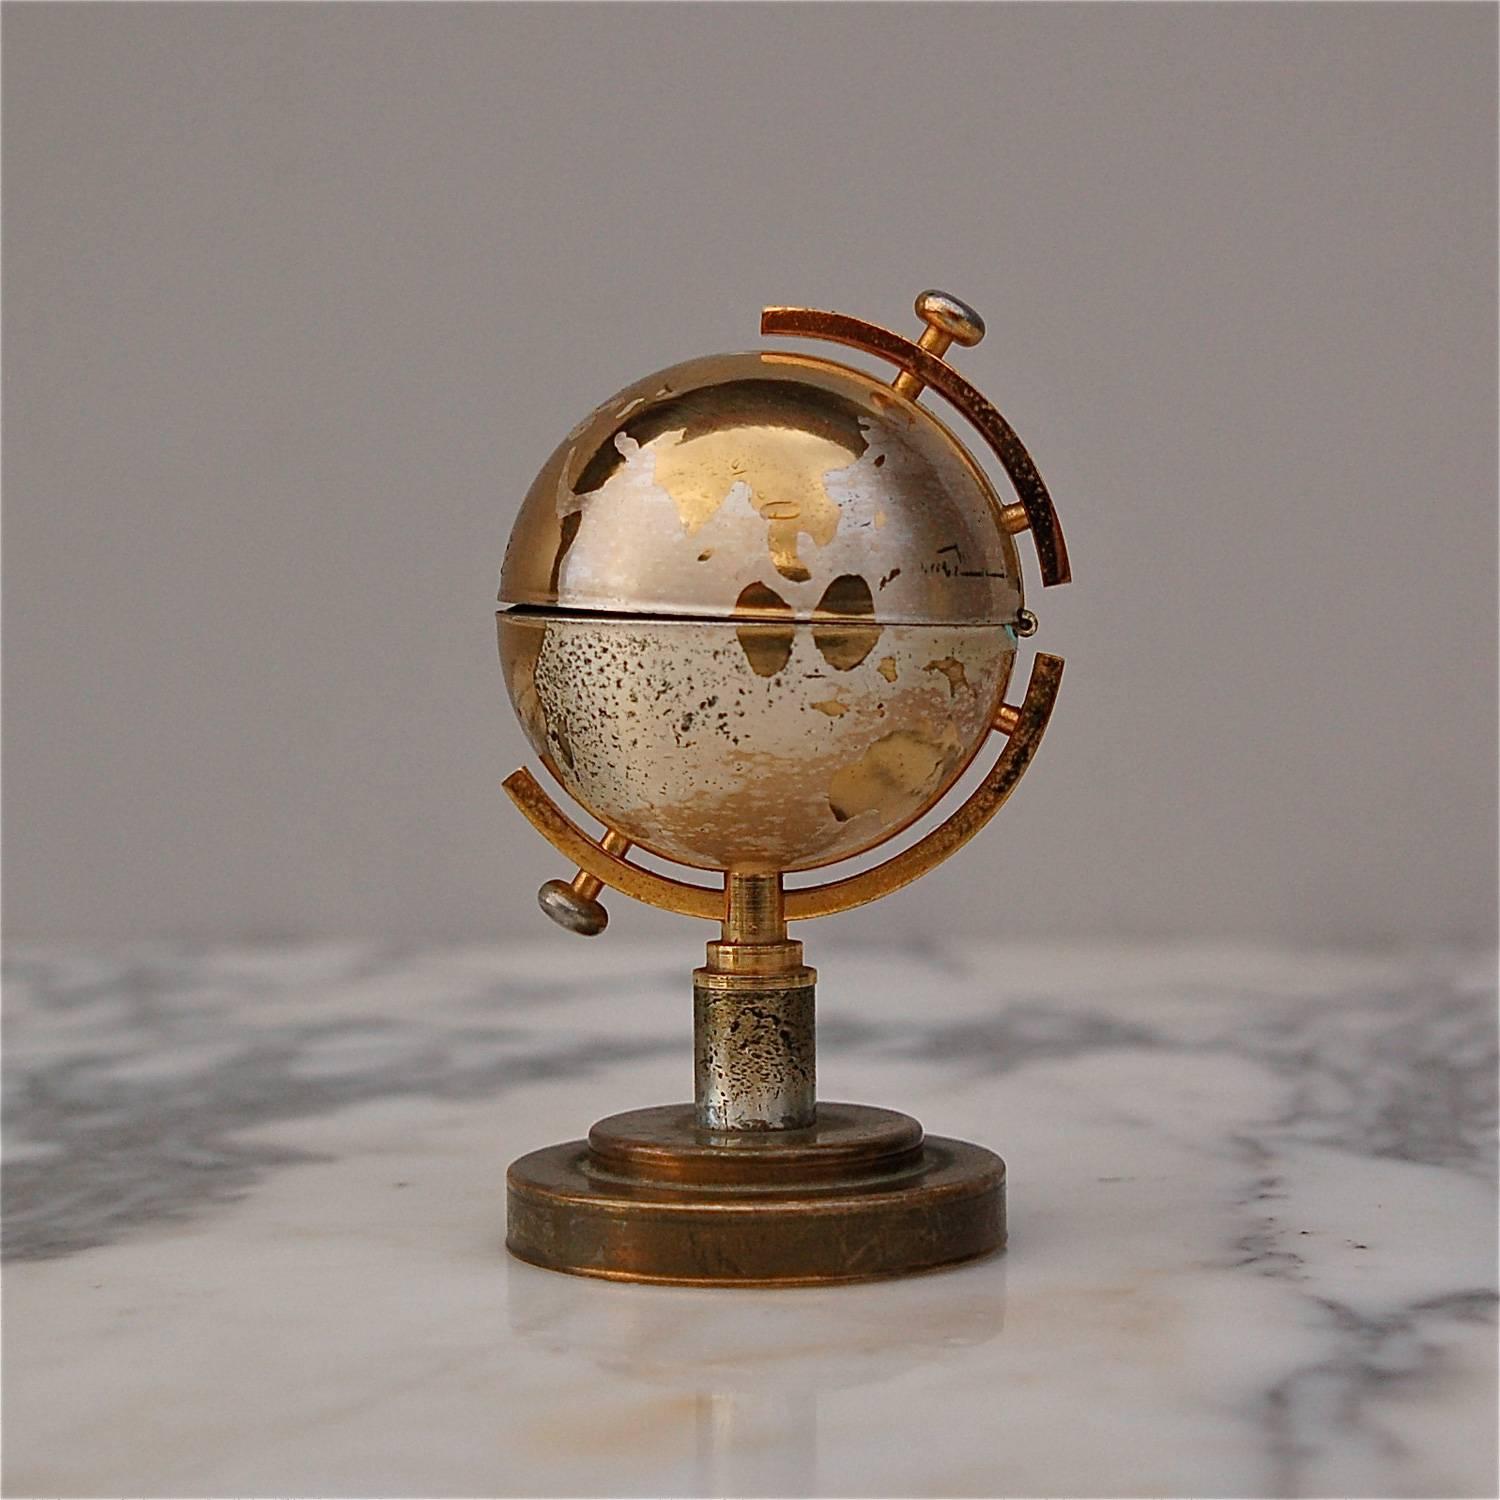 At first sight, you'd never imagine this shiny little globe would morph into a cigarette lighter. By a simple pull, the top hemisphere flips open revealing the inner part with striker. This lovely decorative item is very evocative of the glamorous